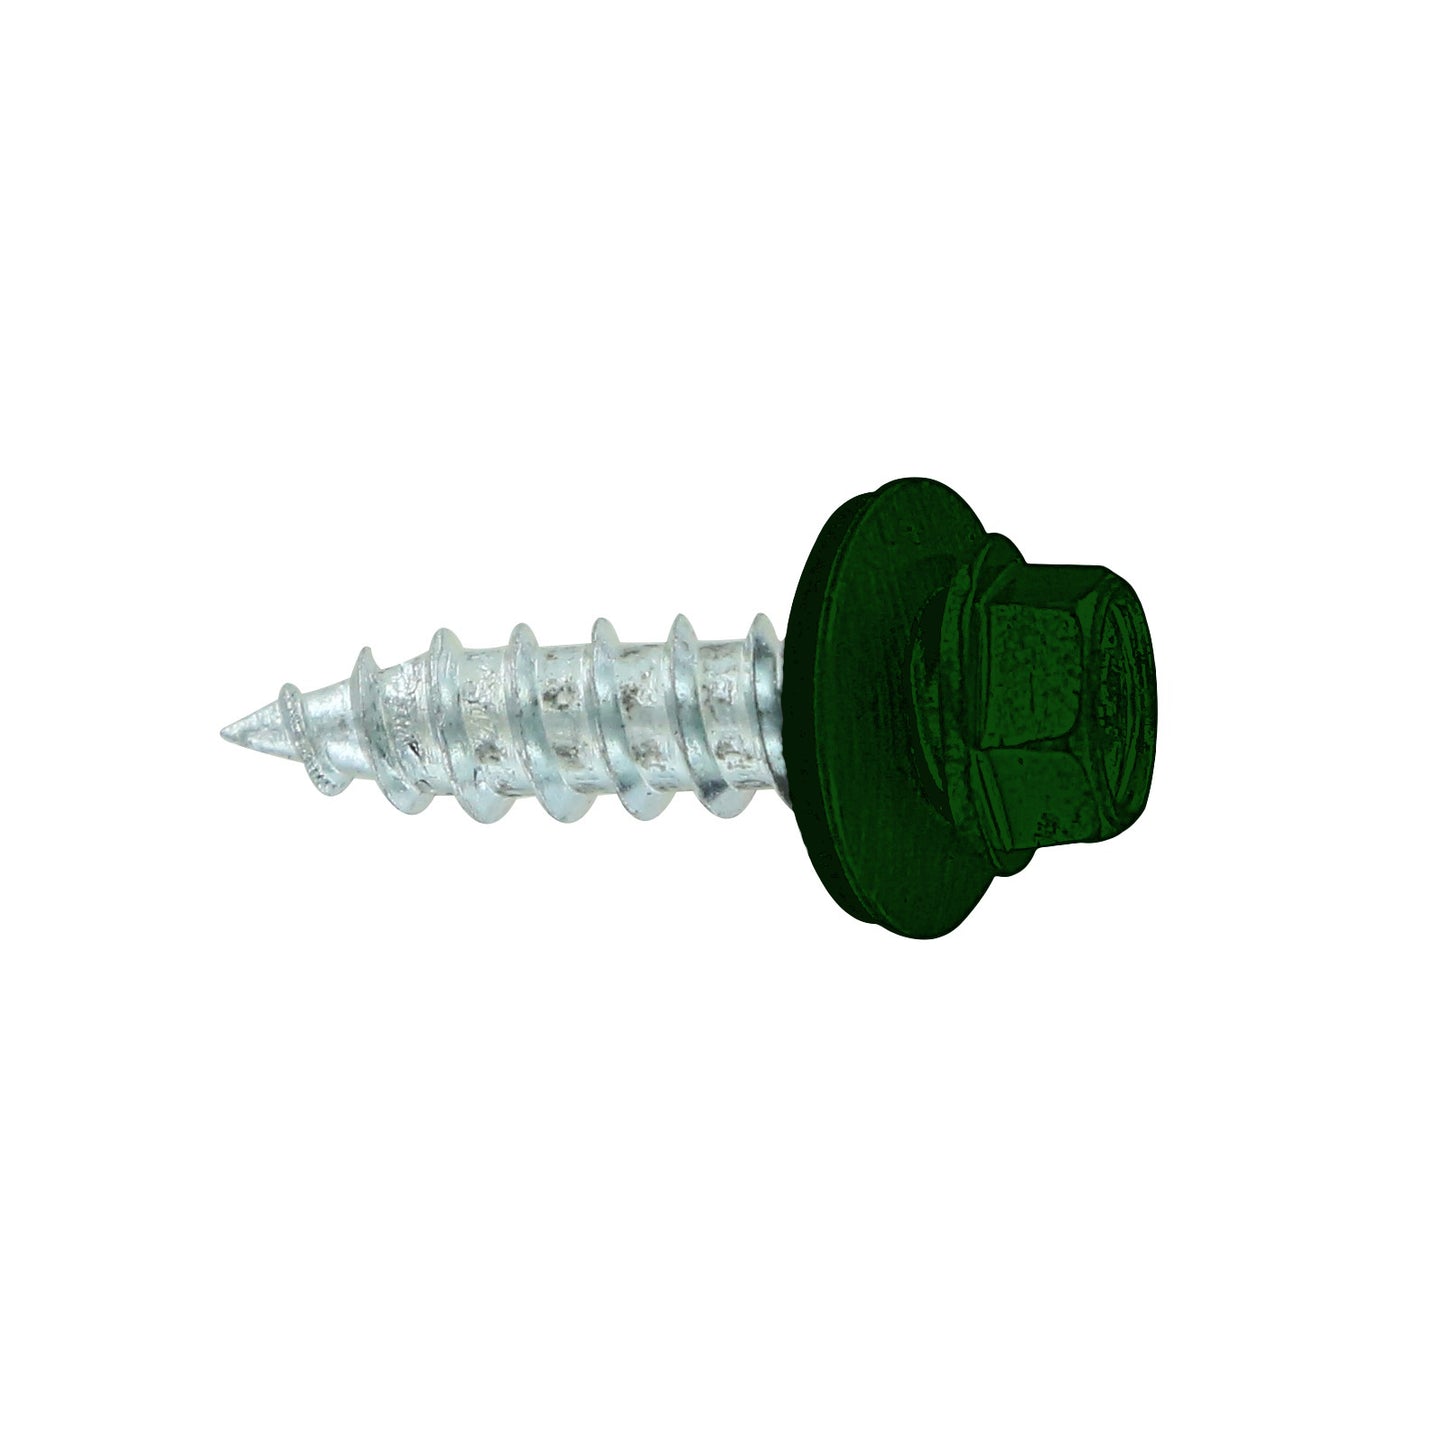 #14 x 1 inch #14 Type 17 Woodbinder Metal Roofing Screw Forest Green Pkg 250 image 1 of 2